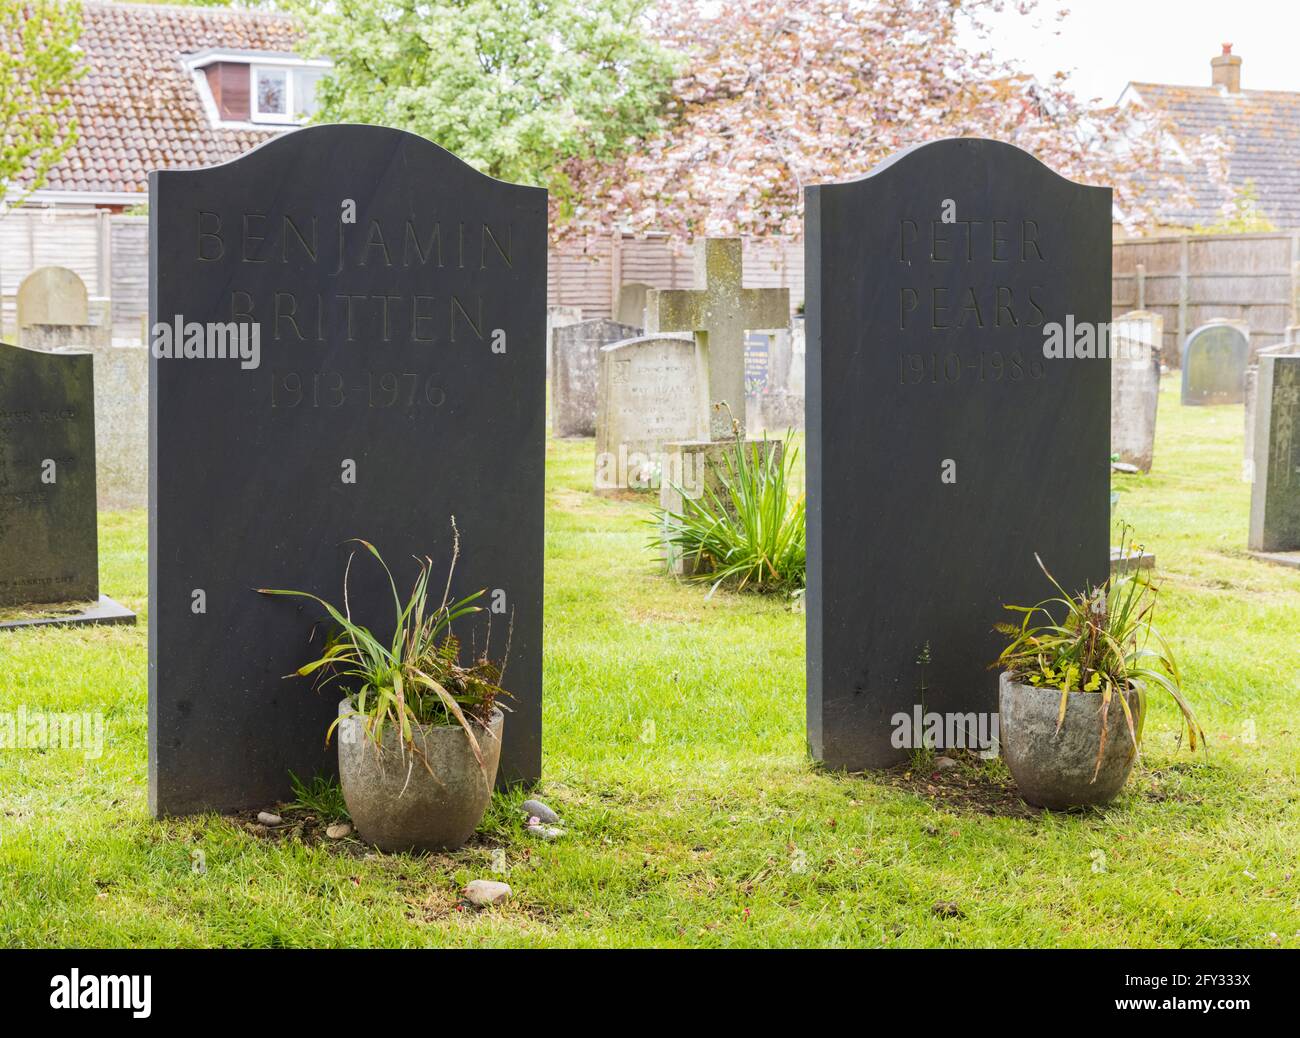 The headstones and resting place of composer Benjamin Britten and Peter Pears in the cemetery of St Peter and St Paul's Church, Aldeburgh, Suffolk. UK Stock Photo